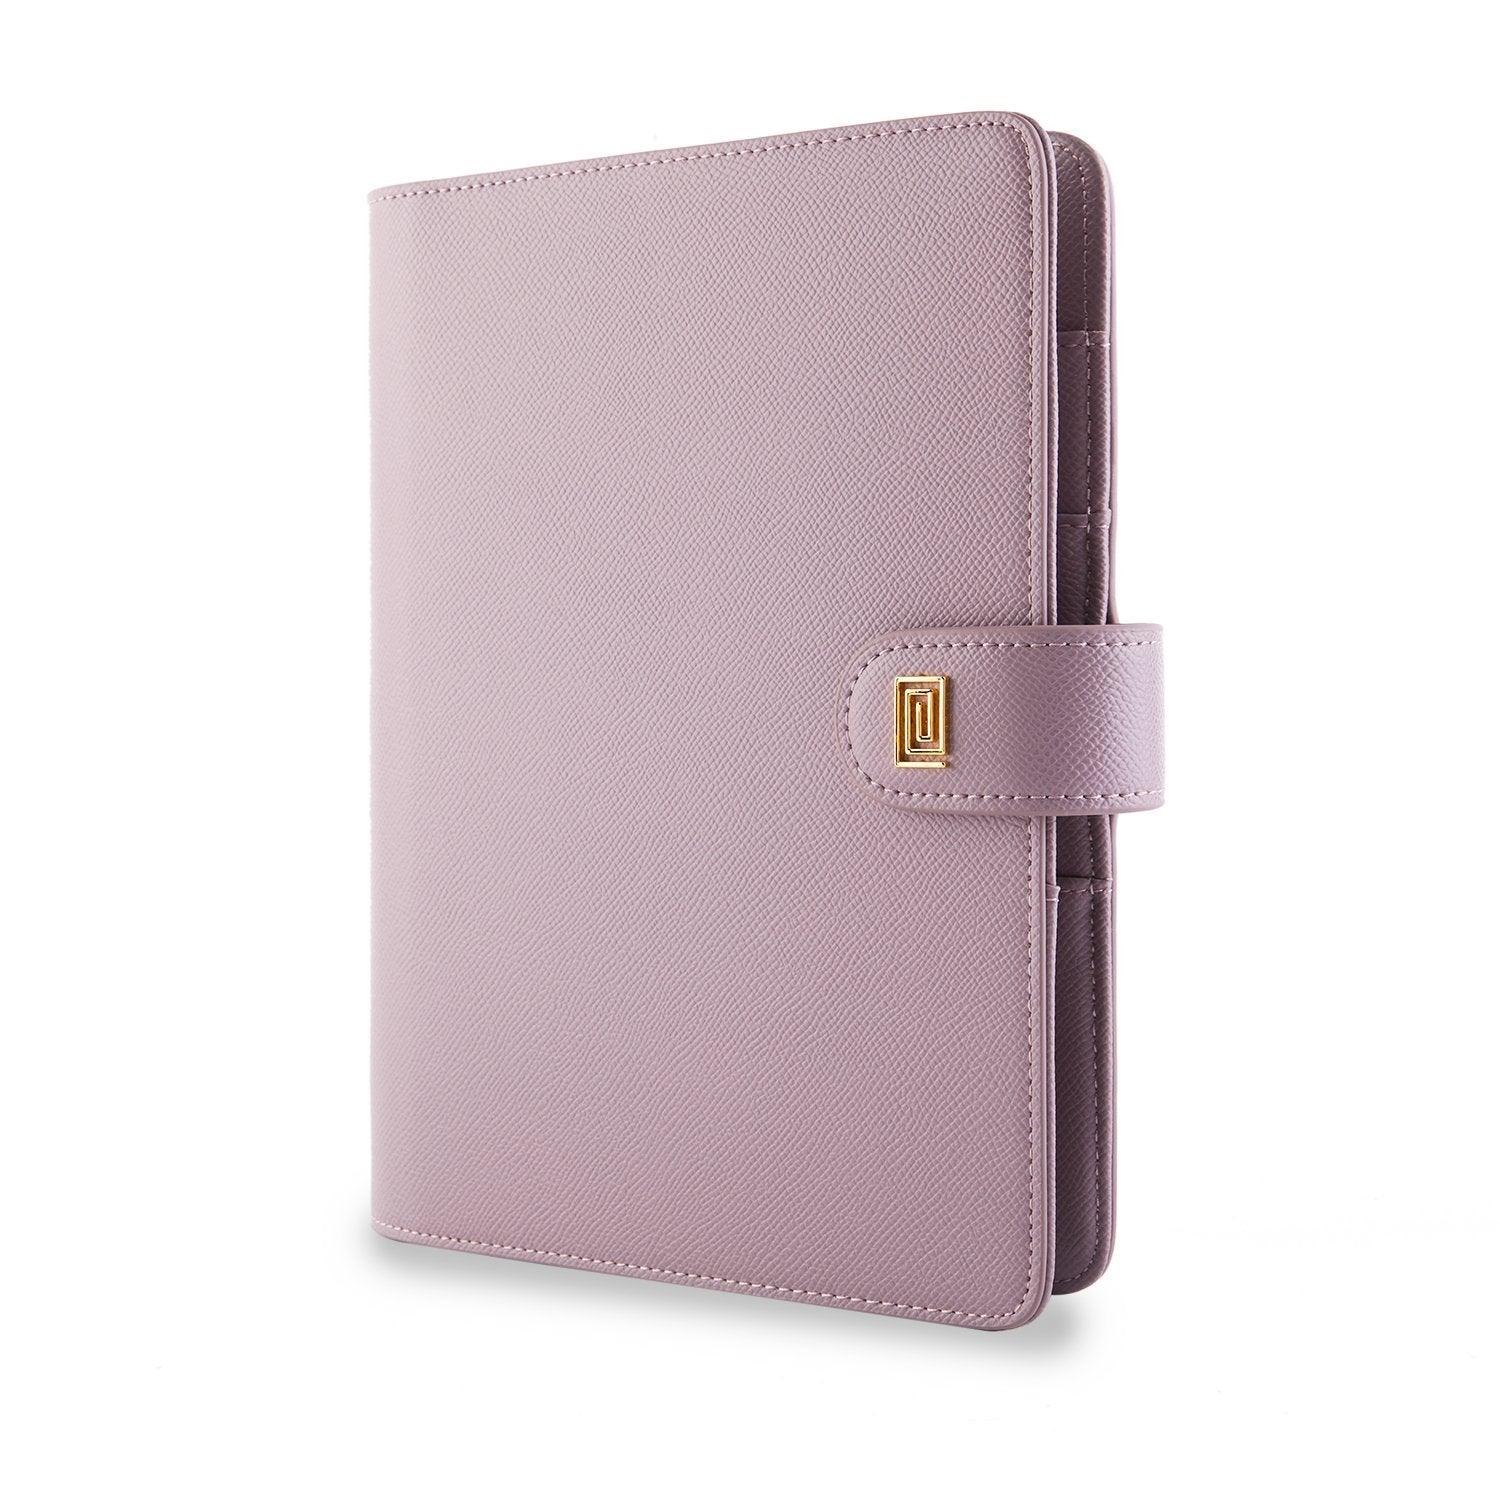 | OUTLET | SS5. Memo B6 Ring Agenda | B6 Planner Cover | Final Sale | NOTIQ